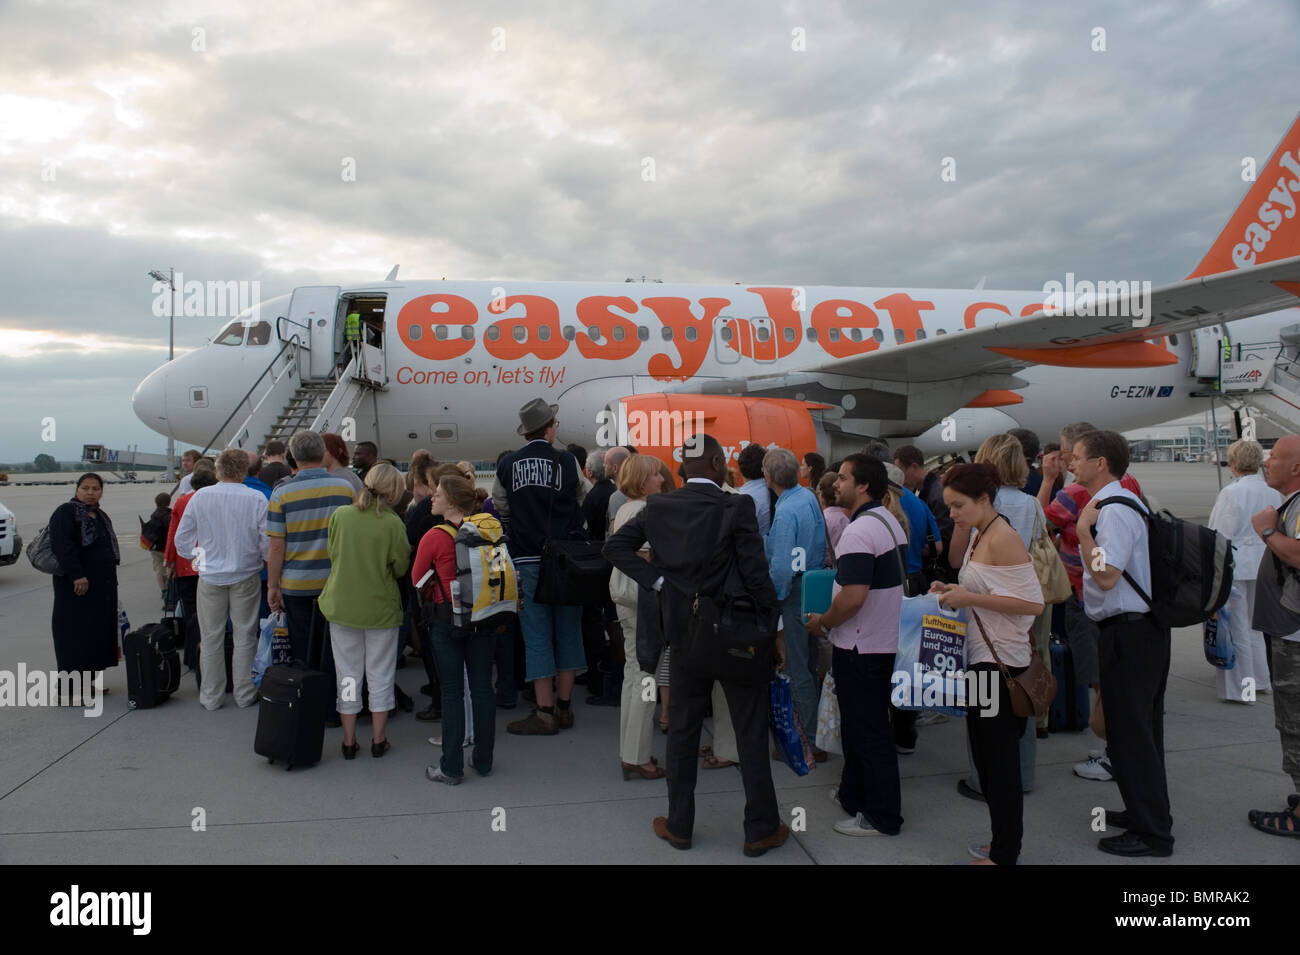 Airline passengers boarding a plane of discount airline Easyjet at Munich airport Germany Stock Photo